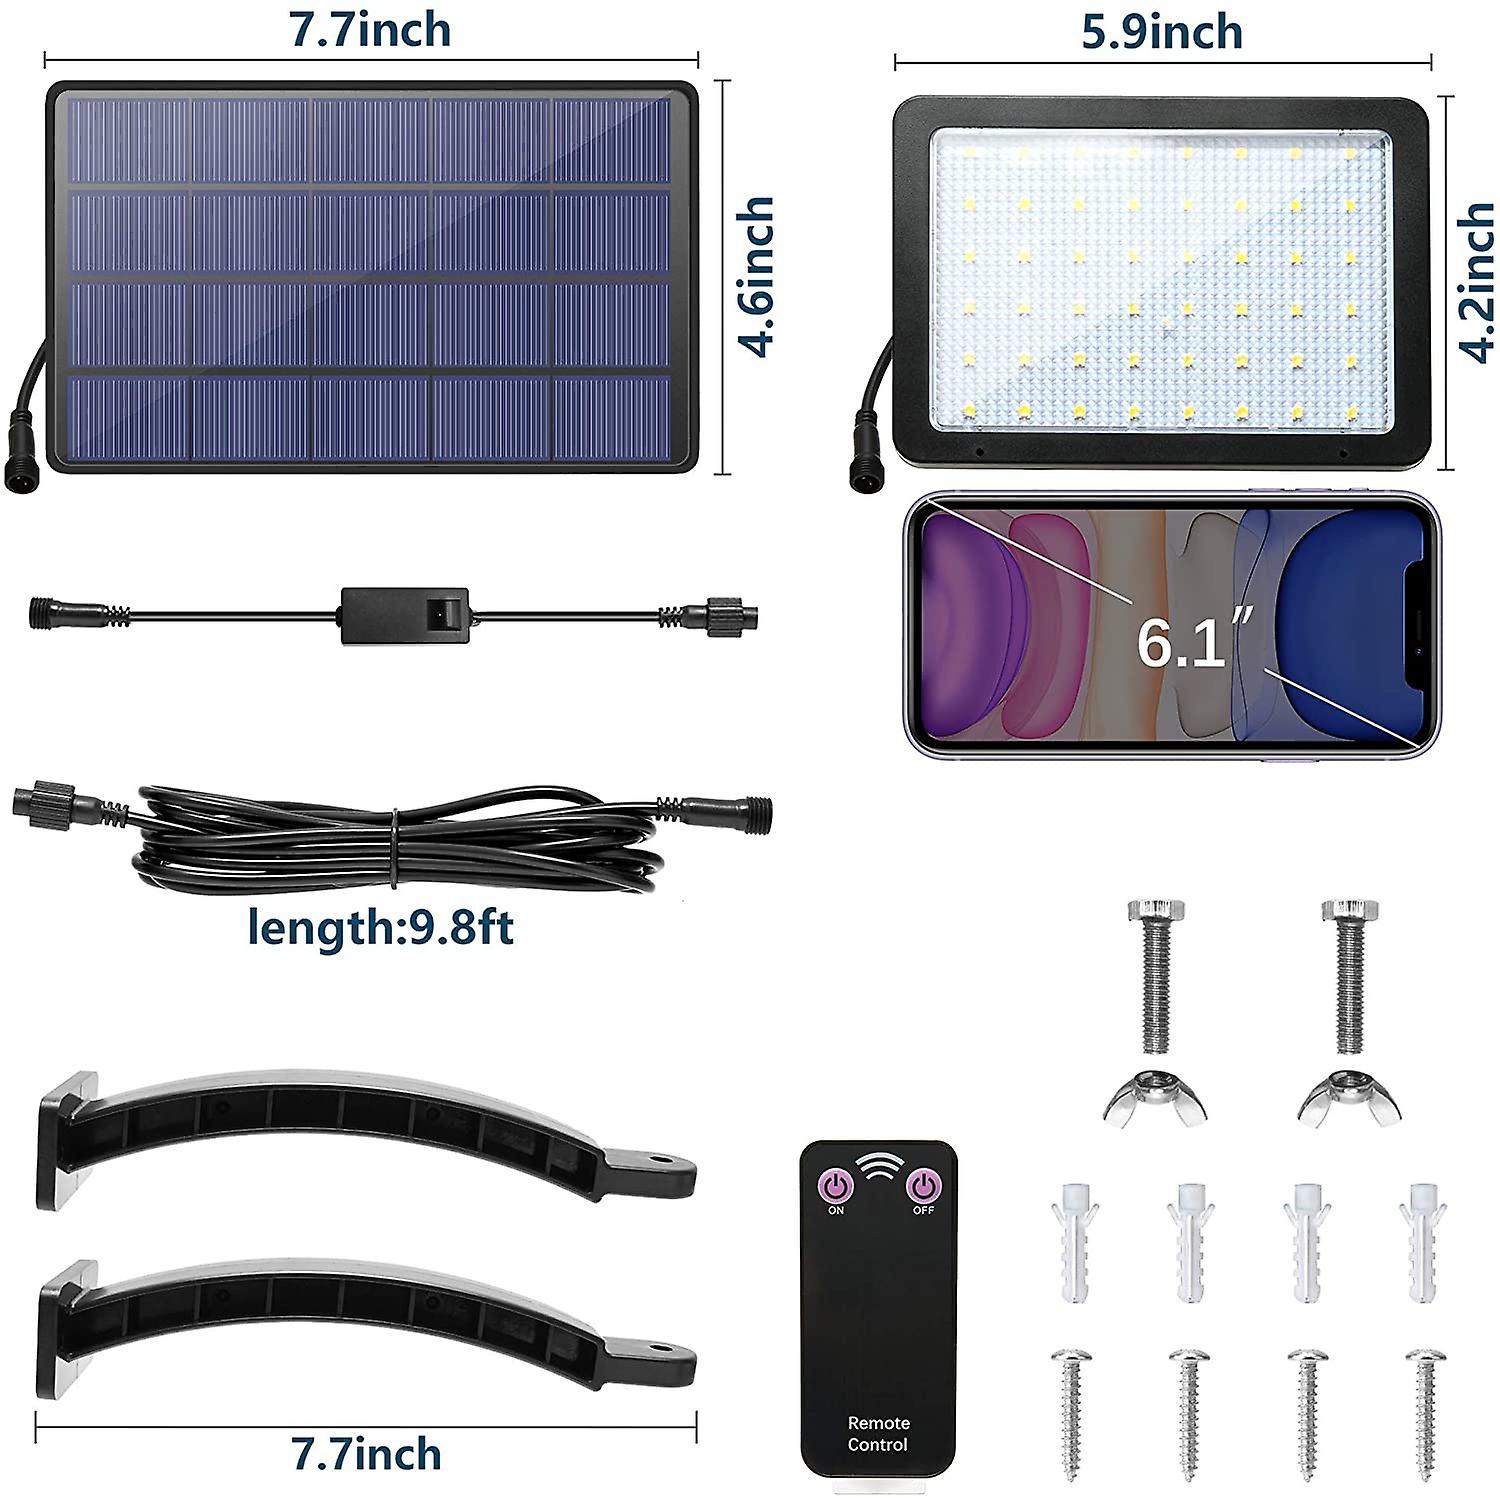 Solar Lights Outdoor With Remote Control Naimp 48 Led Dusk To Dawn Solar Panel Light Kit With 5500mah Battery And 9.8ft Cord Wall Mount Security Light